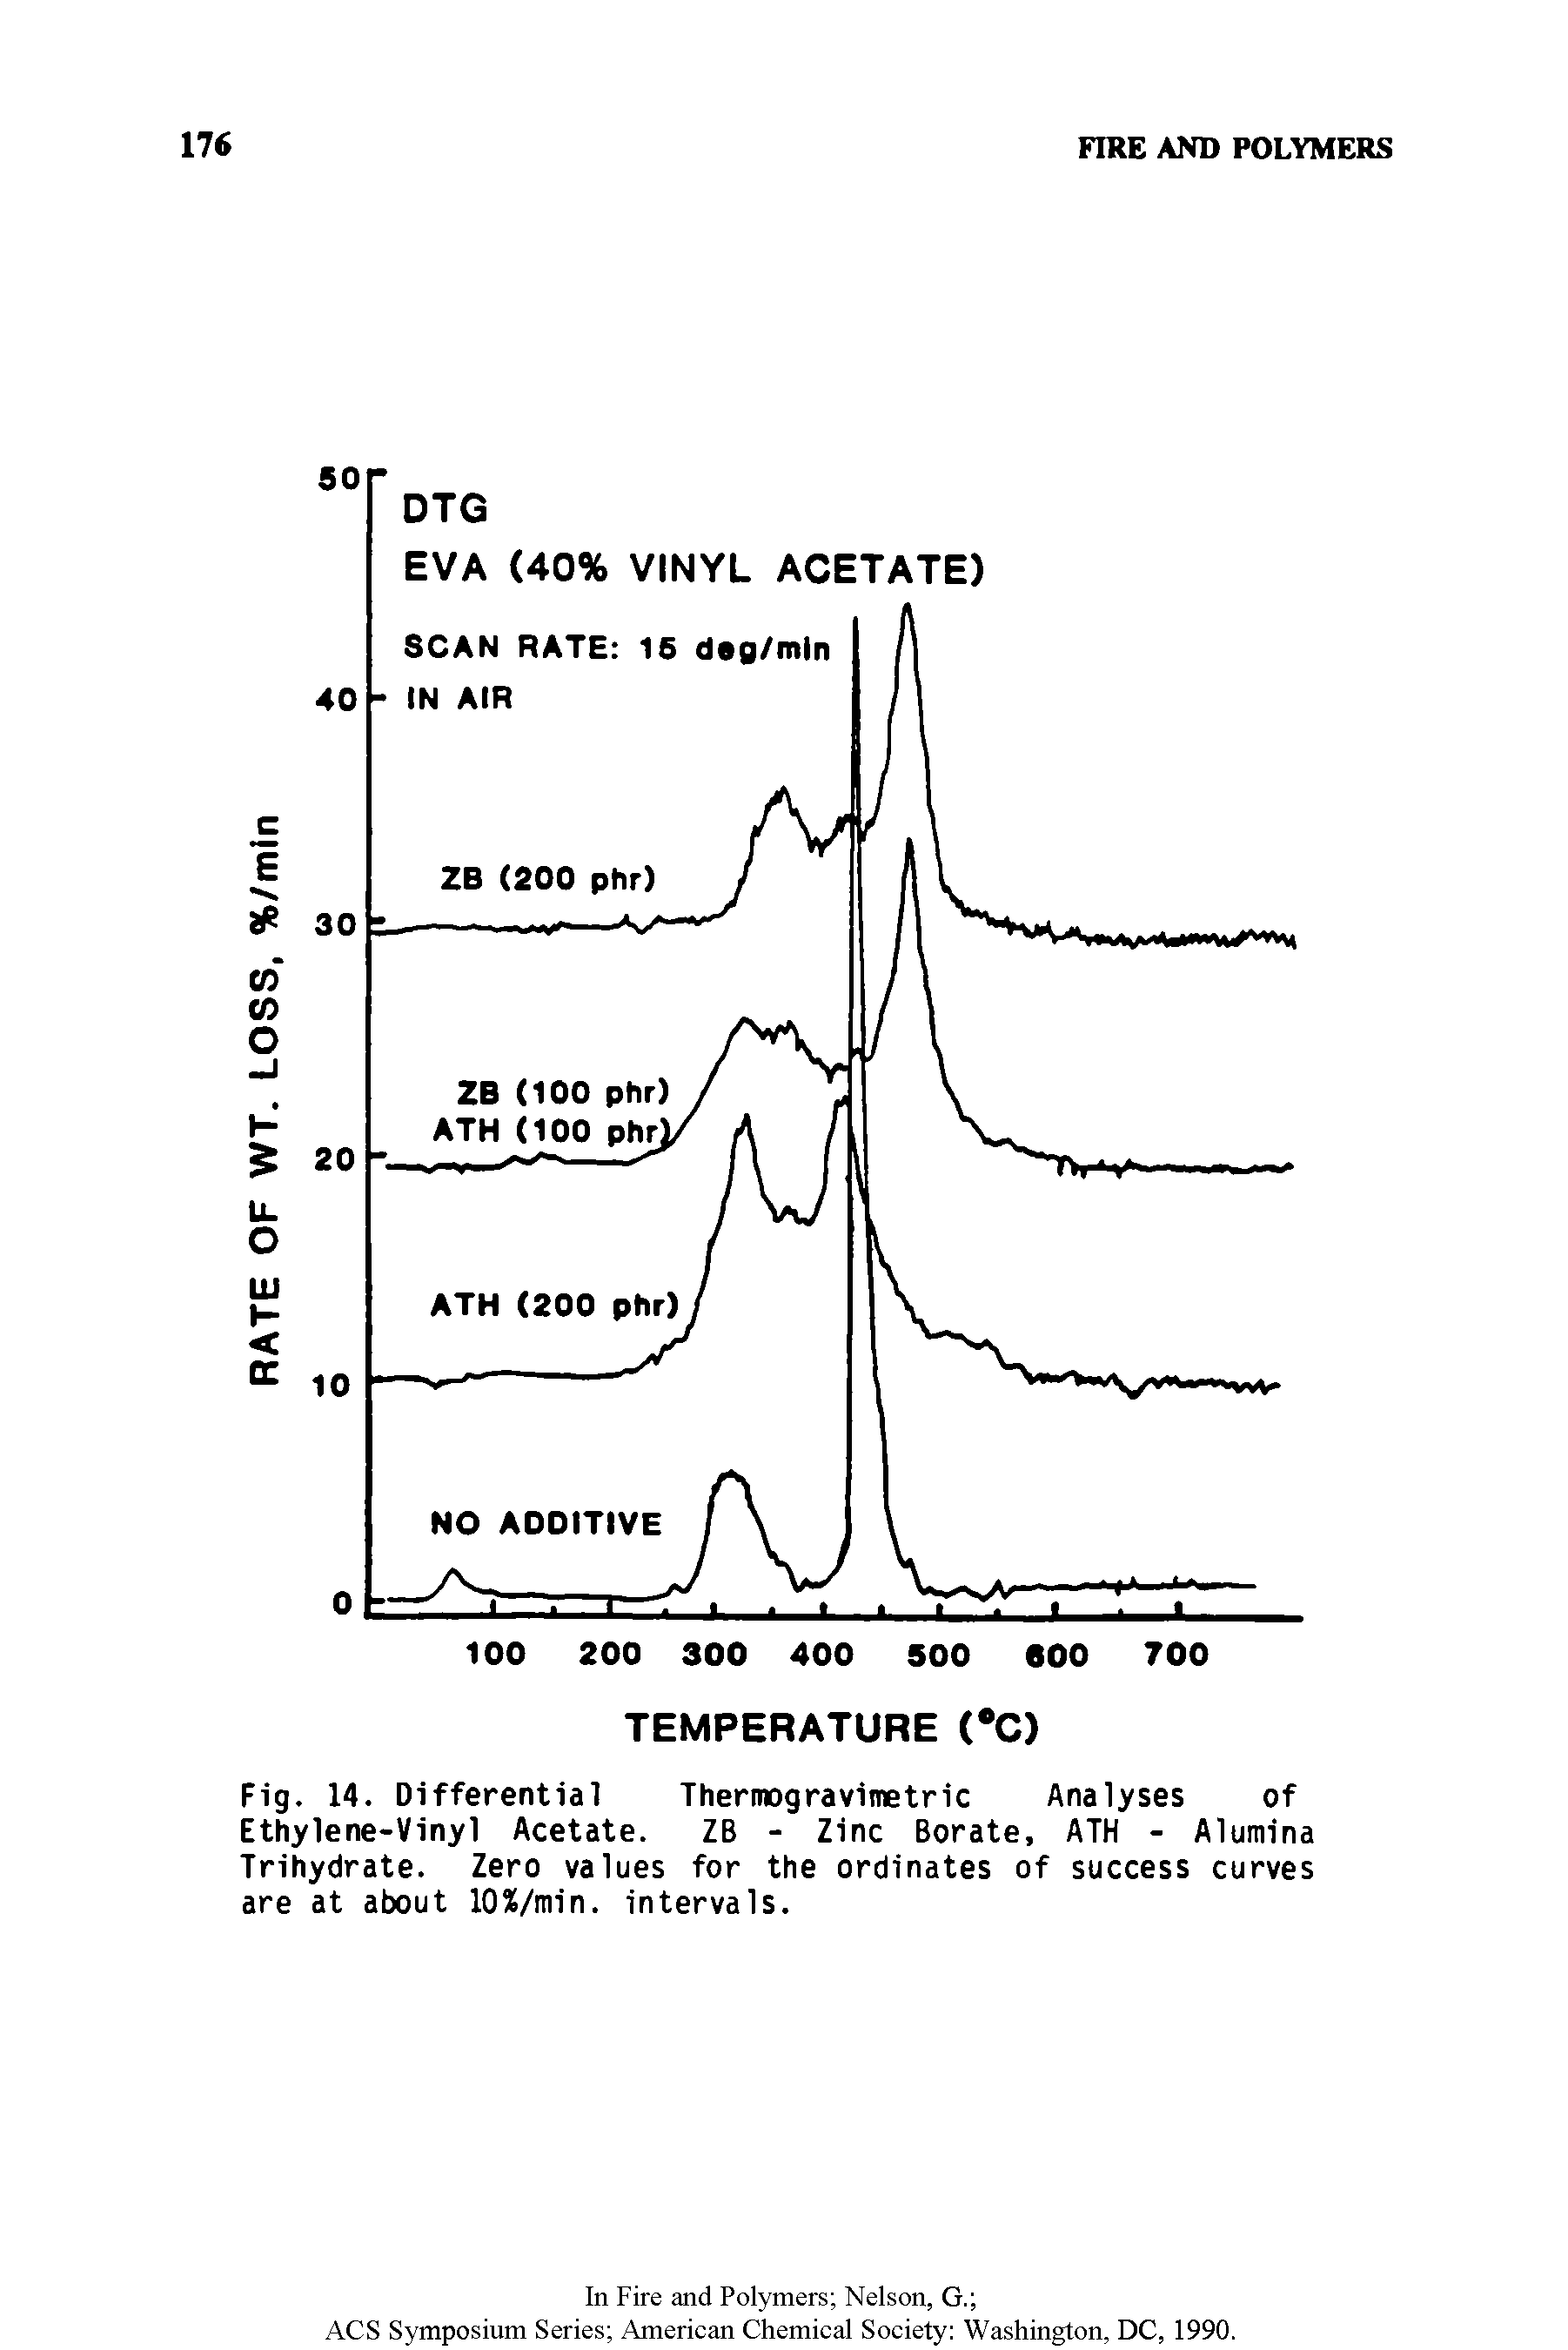 Fig. 14. Differential Thermogravimetric Analyses of Ethylene-Vinyl Acetate. ZB - Zinc Borate, ATH - Alumina Trihydrate. Zero values for the ordinates of success curves are at about 10%/min. intervals.